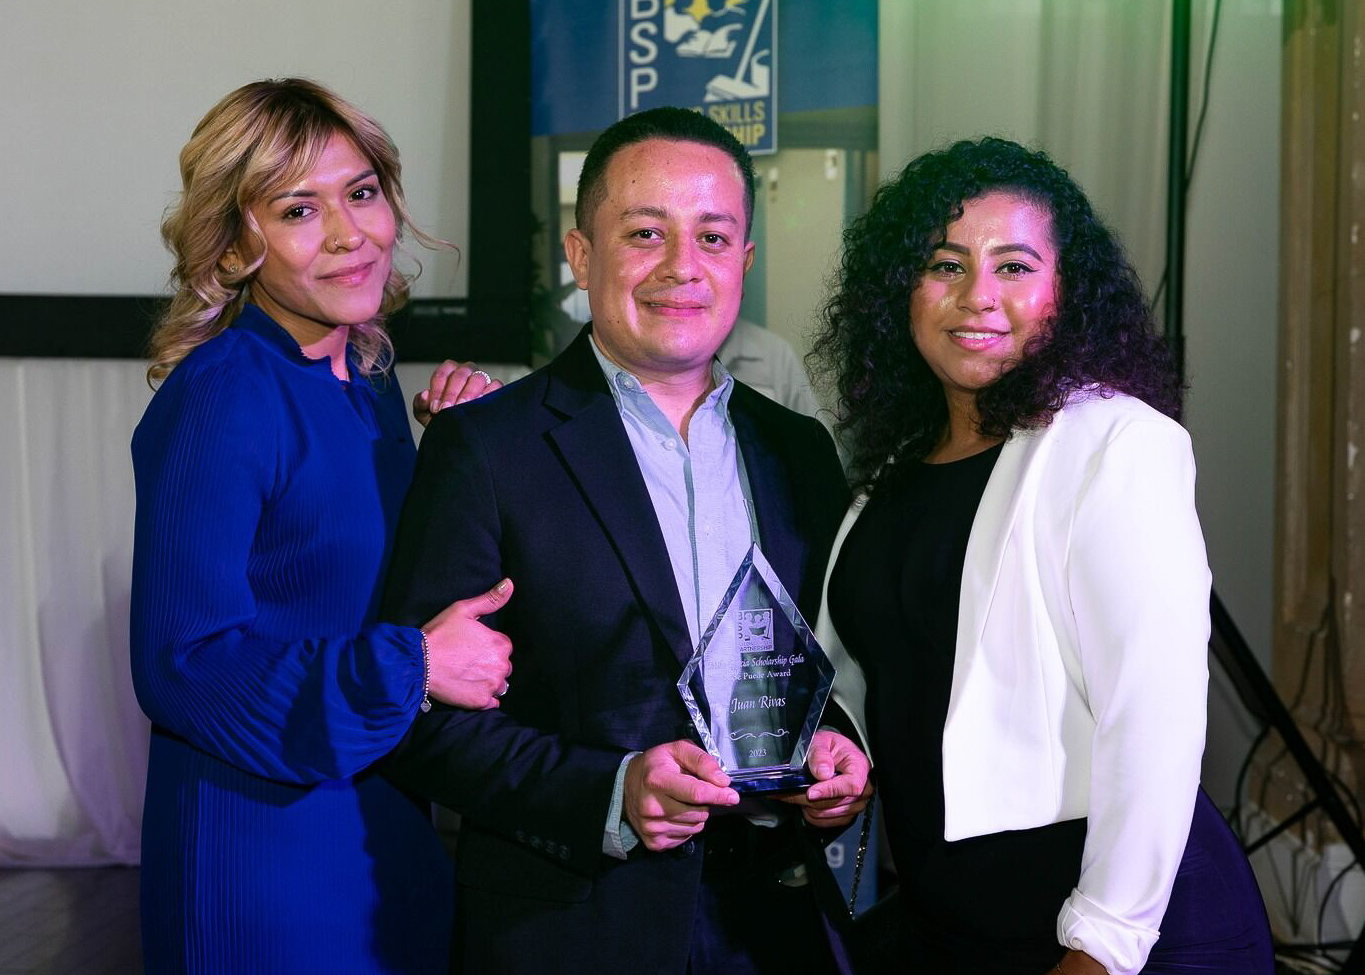 Jaun Rivas holding a crystal award with his name on it, flanked by two women.